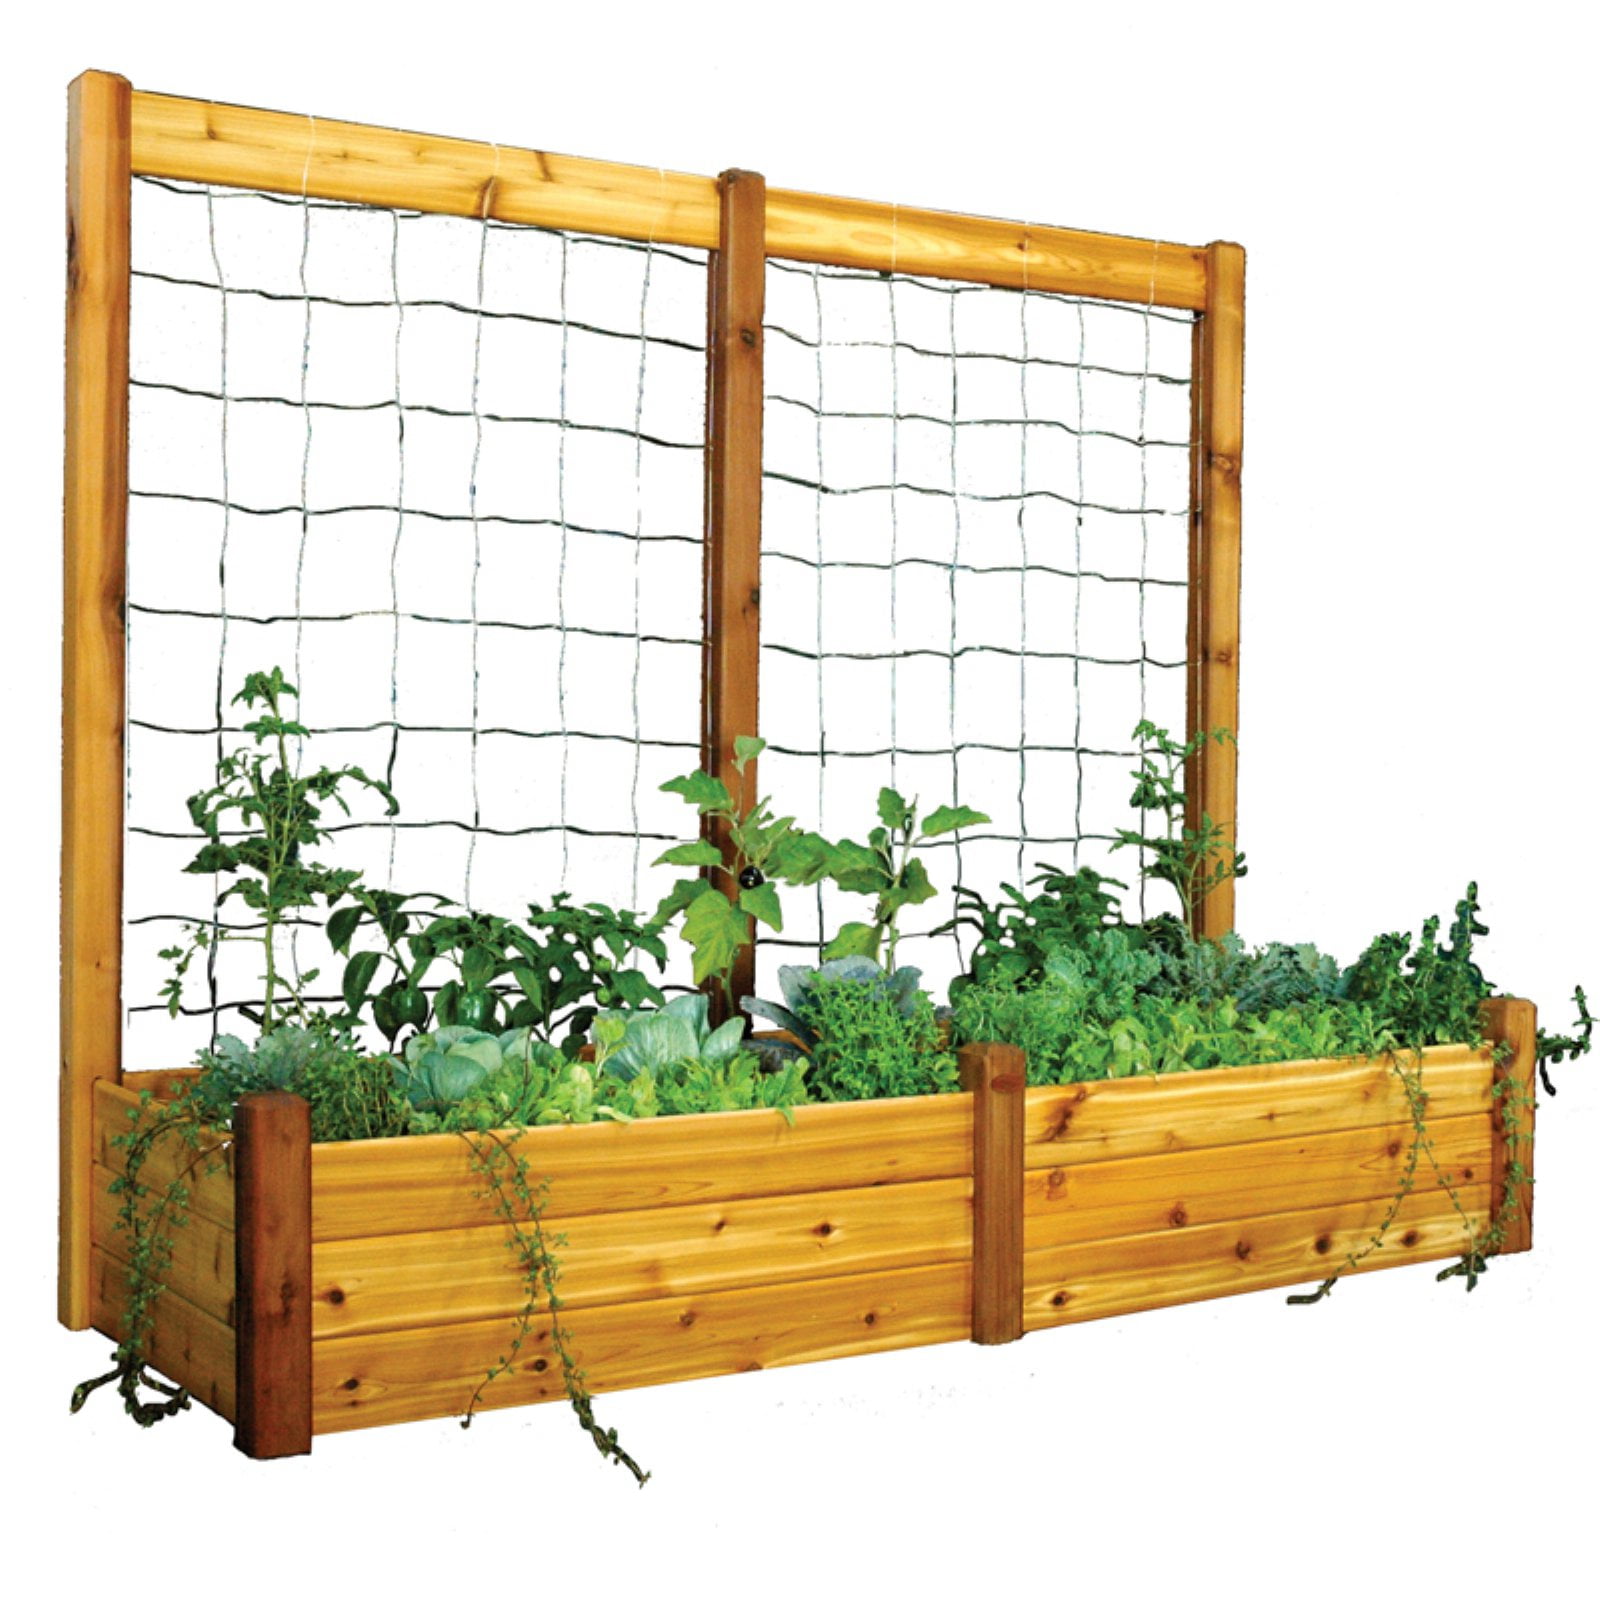 Gronomics 34l X 95w X 19h In Raised Garden Bed With Trellis Kit